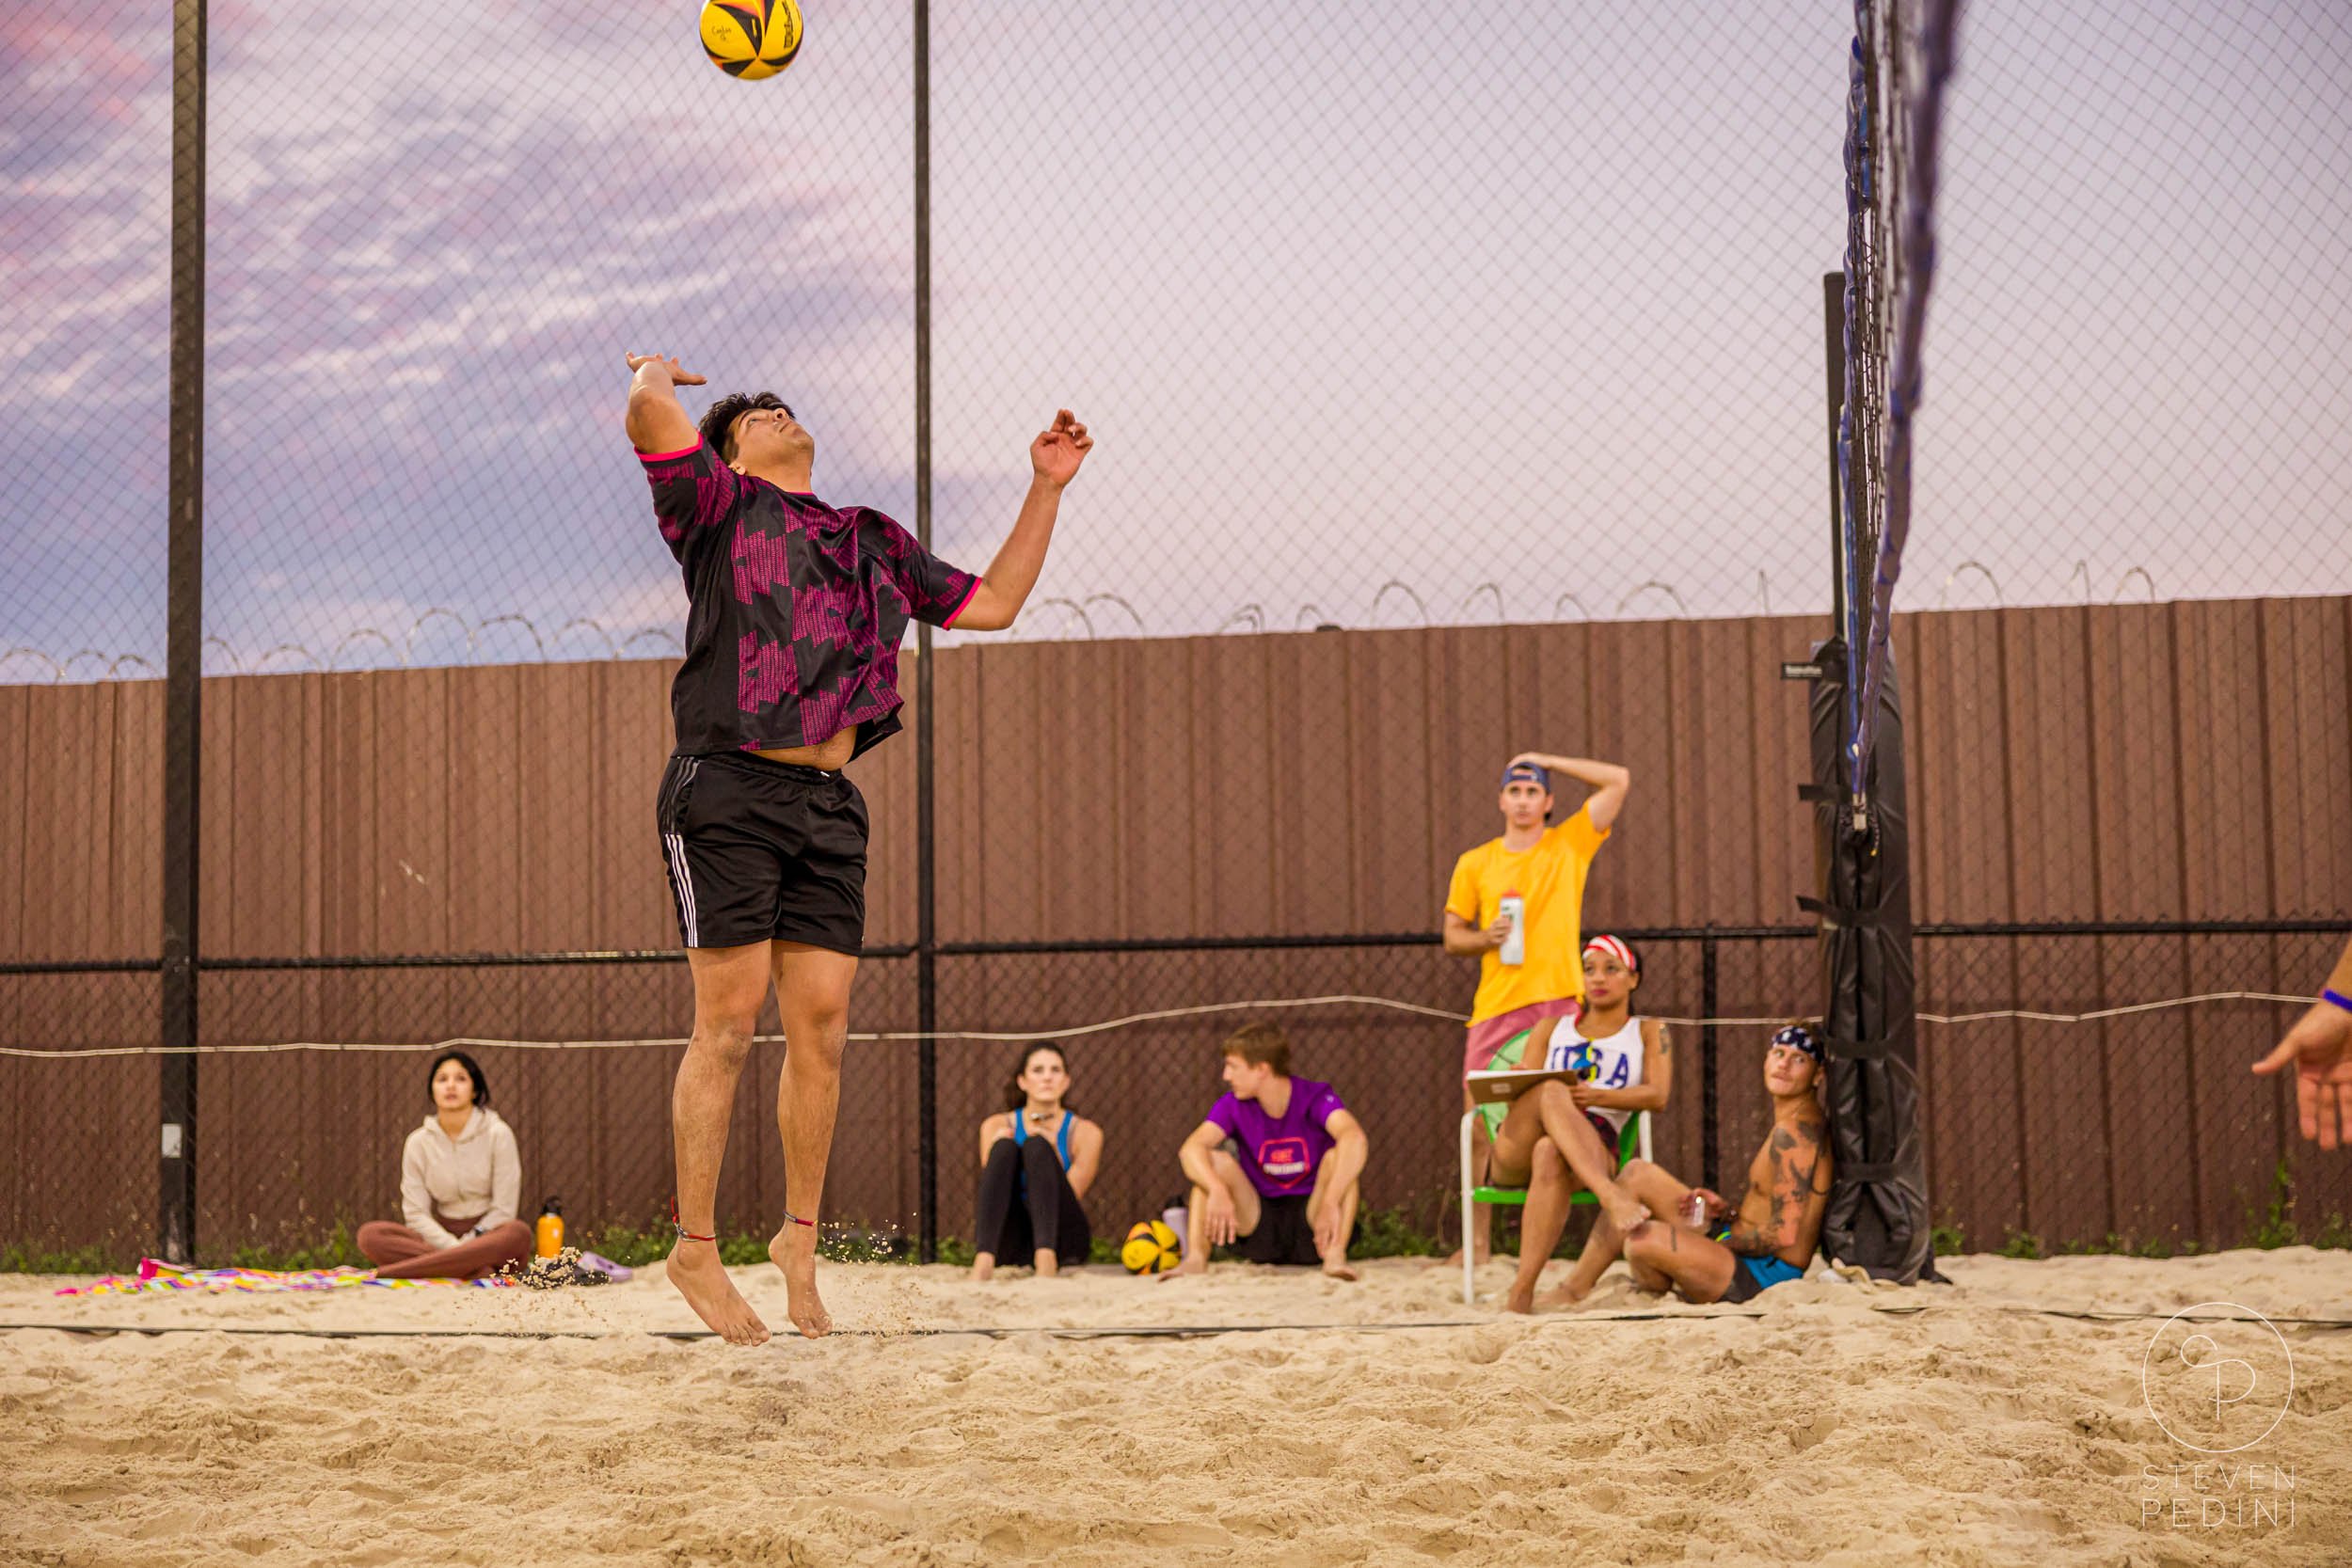 Steven Pedini Photography - Bumpy Pickle - Sand Volleyball - Houston TX - World Cup of Volleyball - 00267.jpg